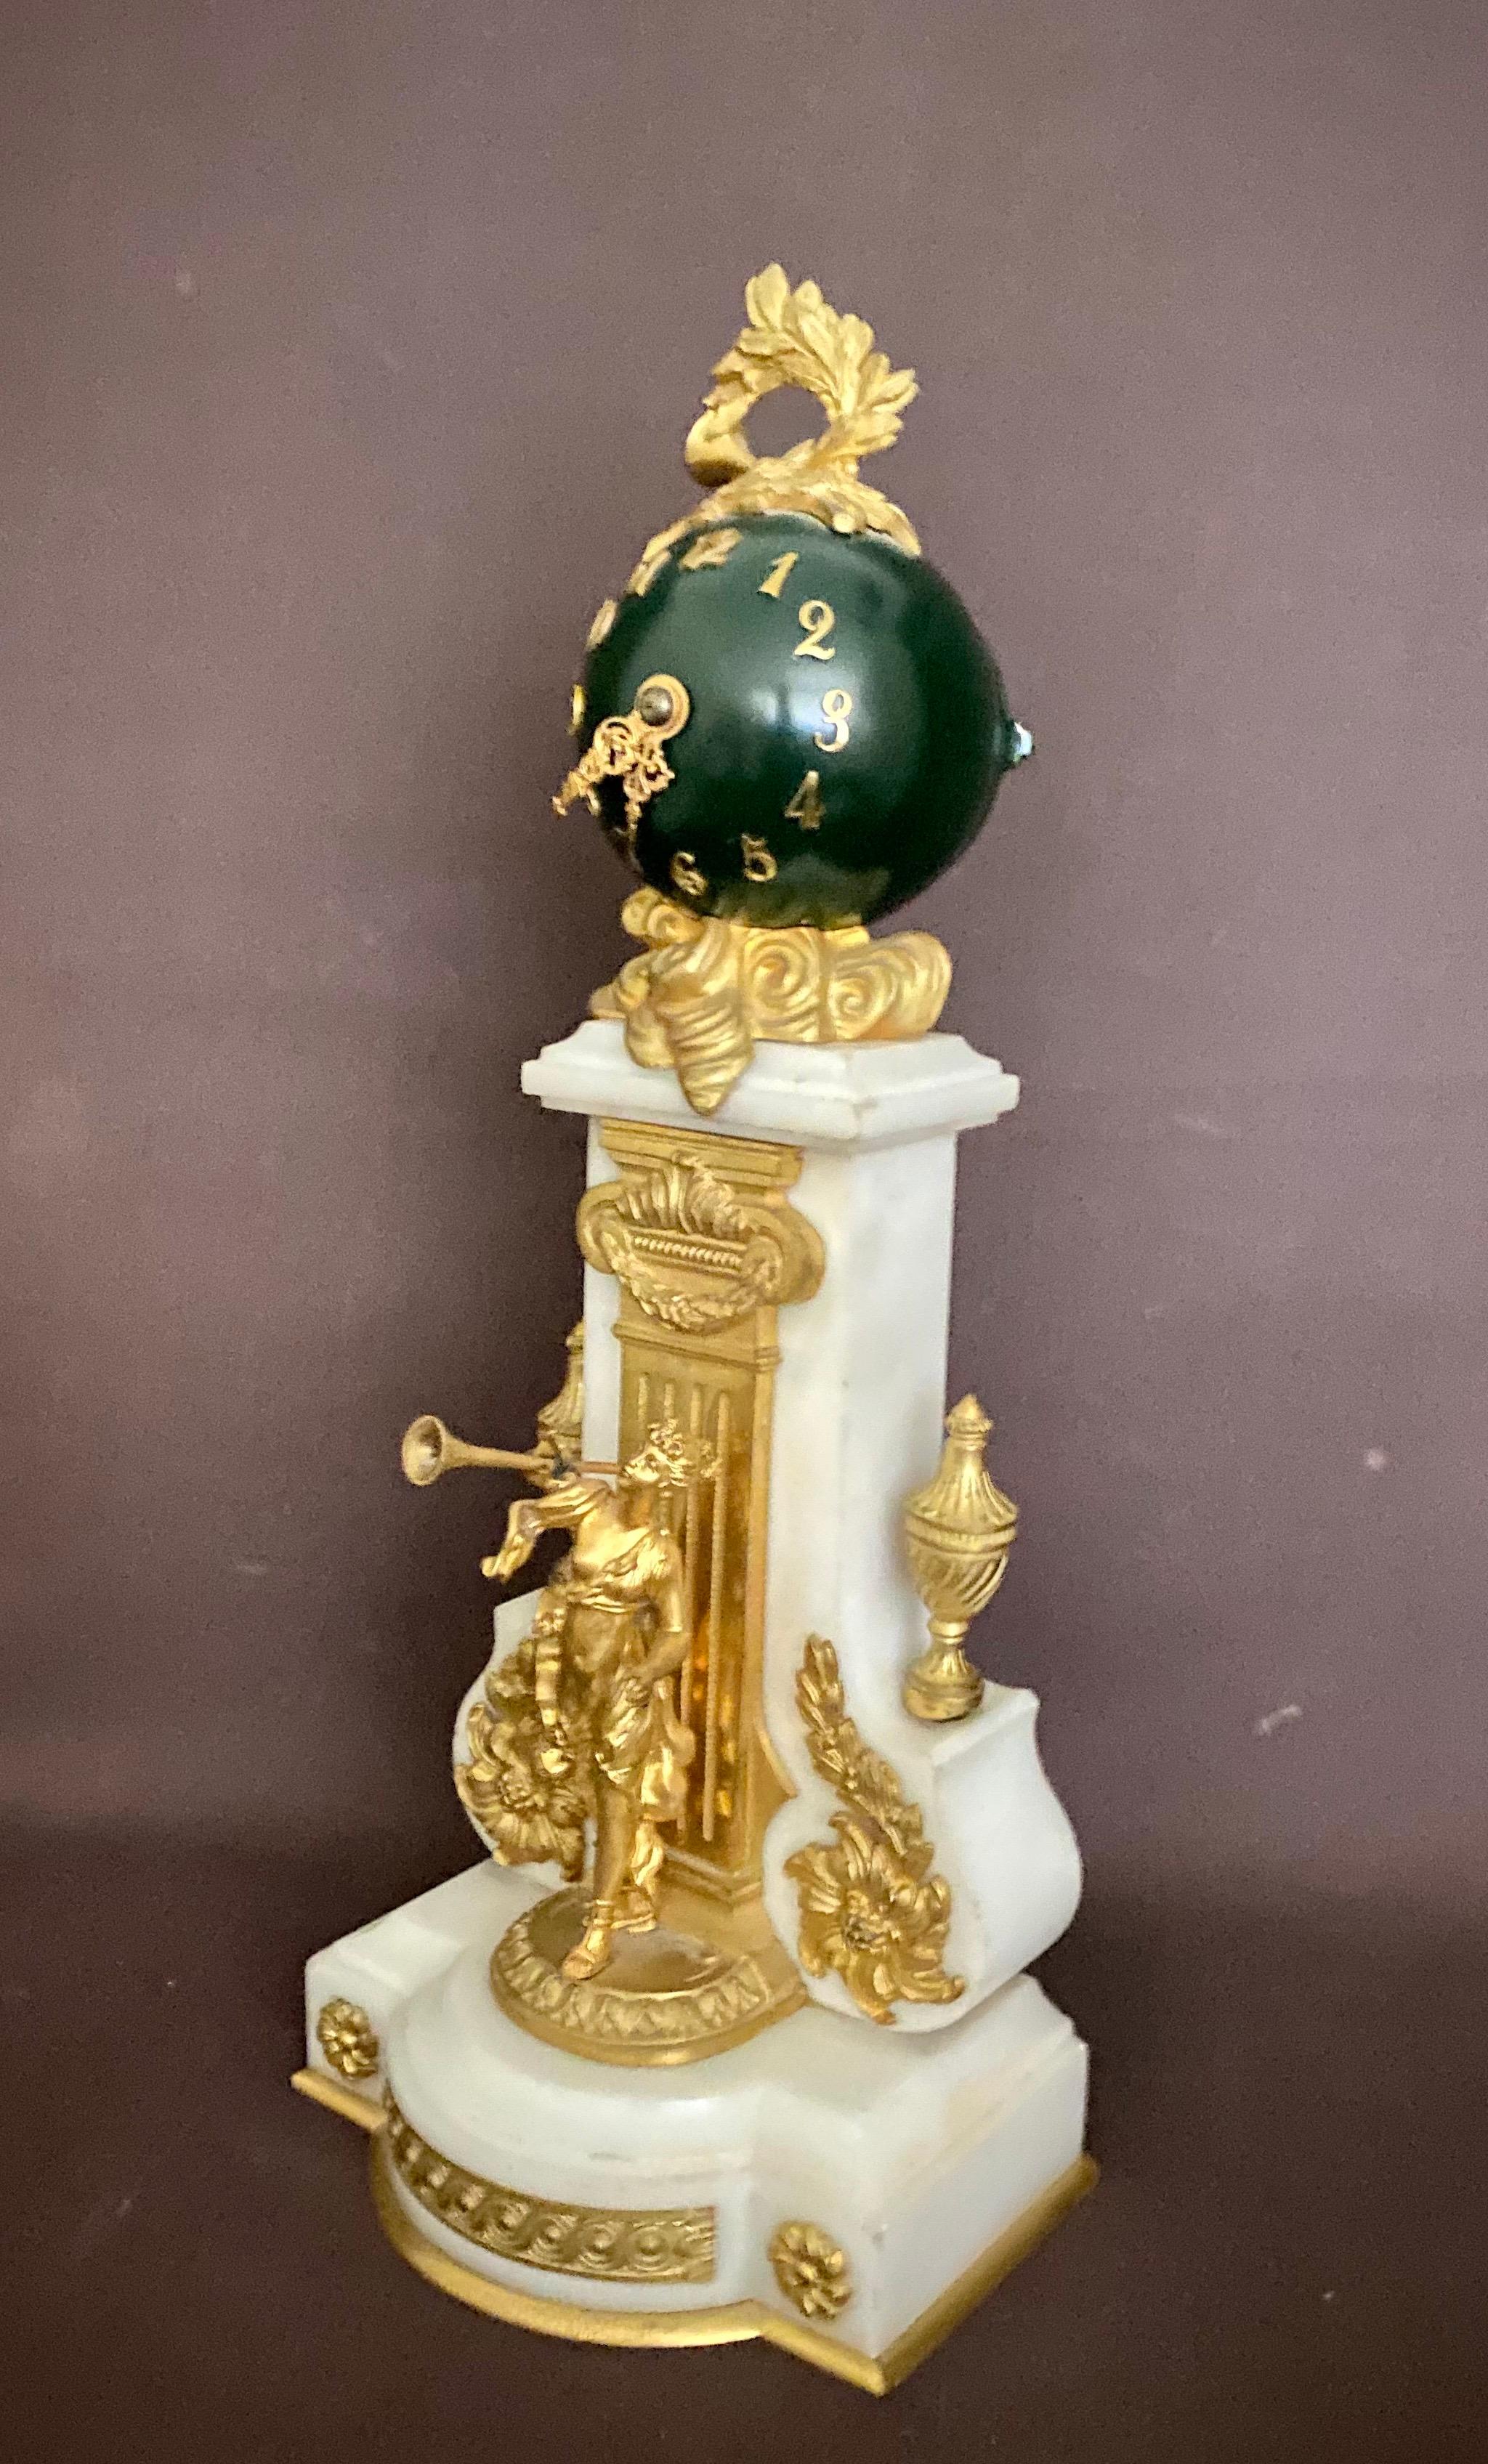 A high quality 19th century French gilt bronze and marble clock, the green ball dial with applied gilt Roman numerals and a Wreath applied to the top.
This is a rare clock measuring 14.5